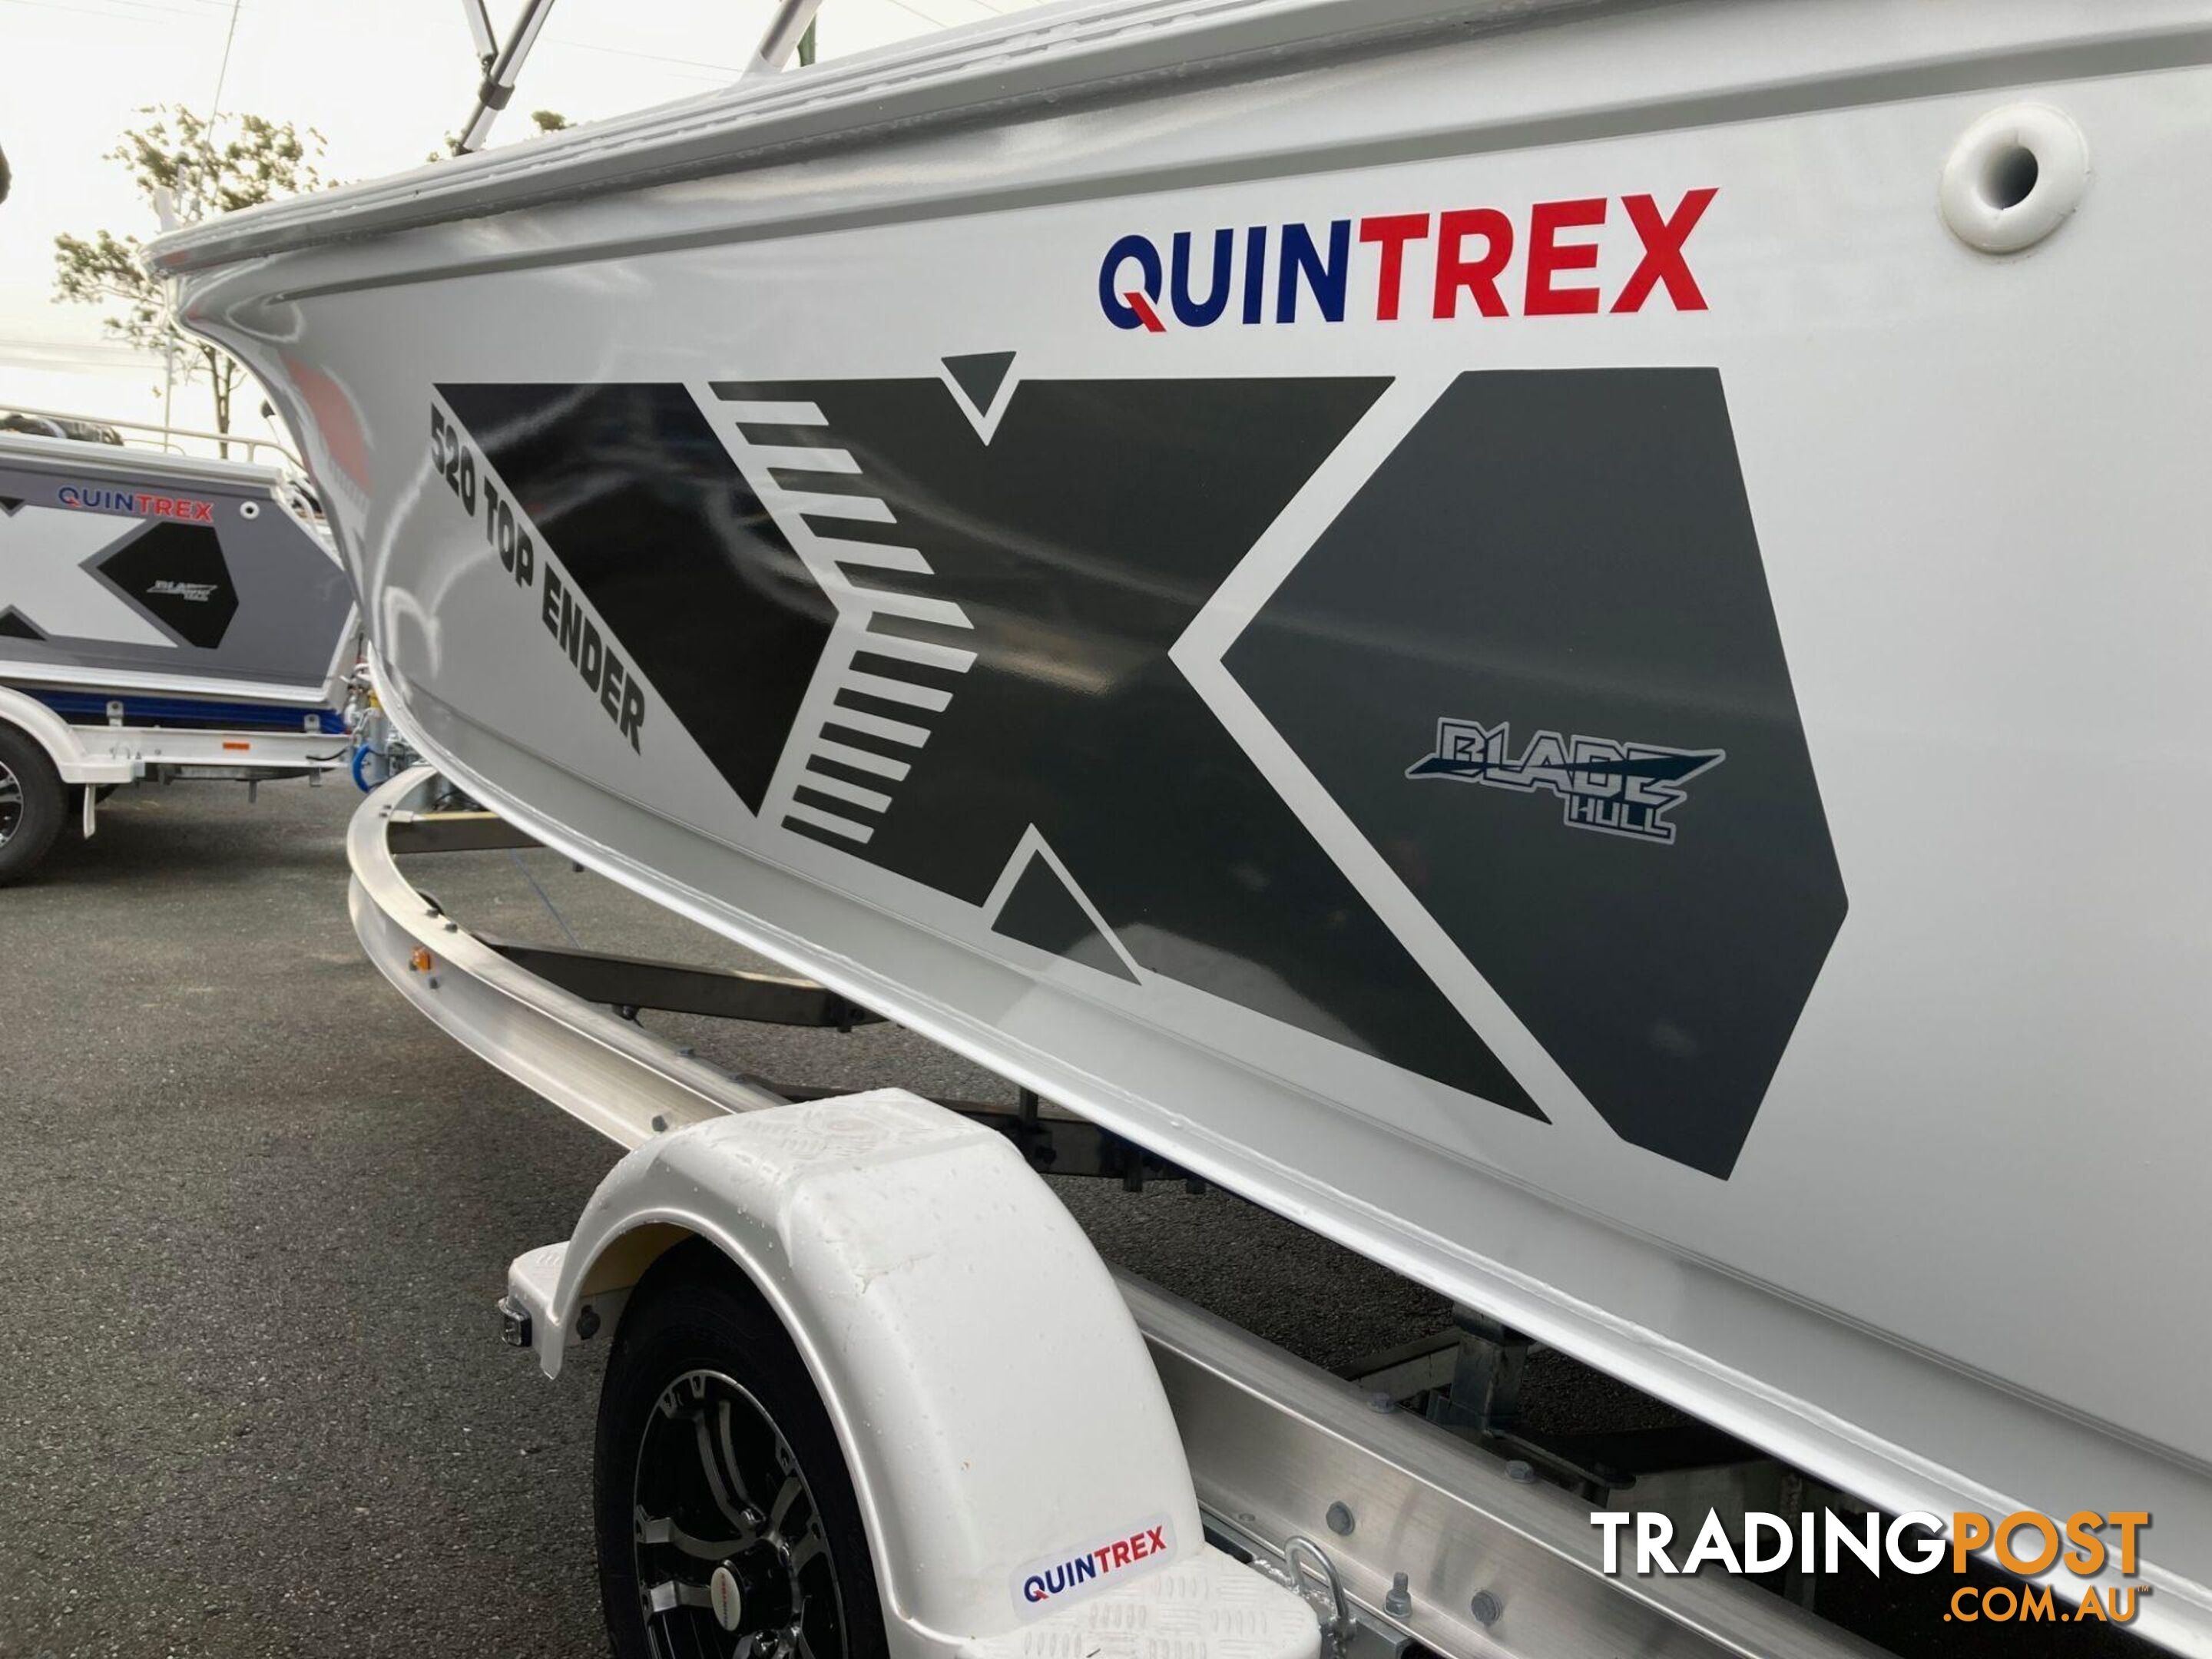 Quintrex 590 Top Ender PACK 3  powered by the Yamaha F150 HP